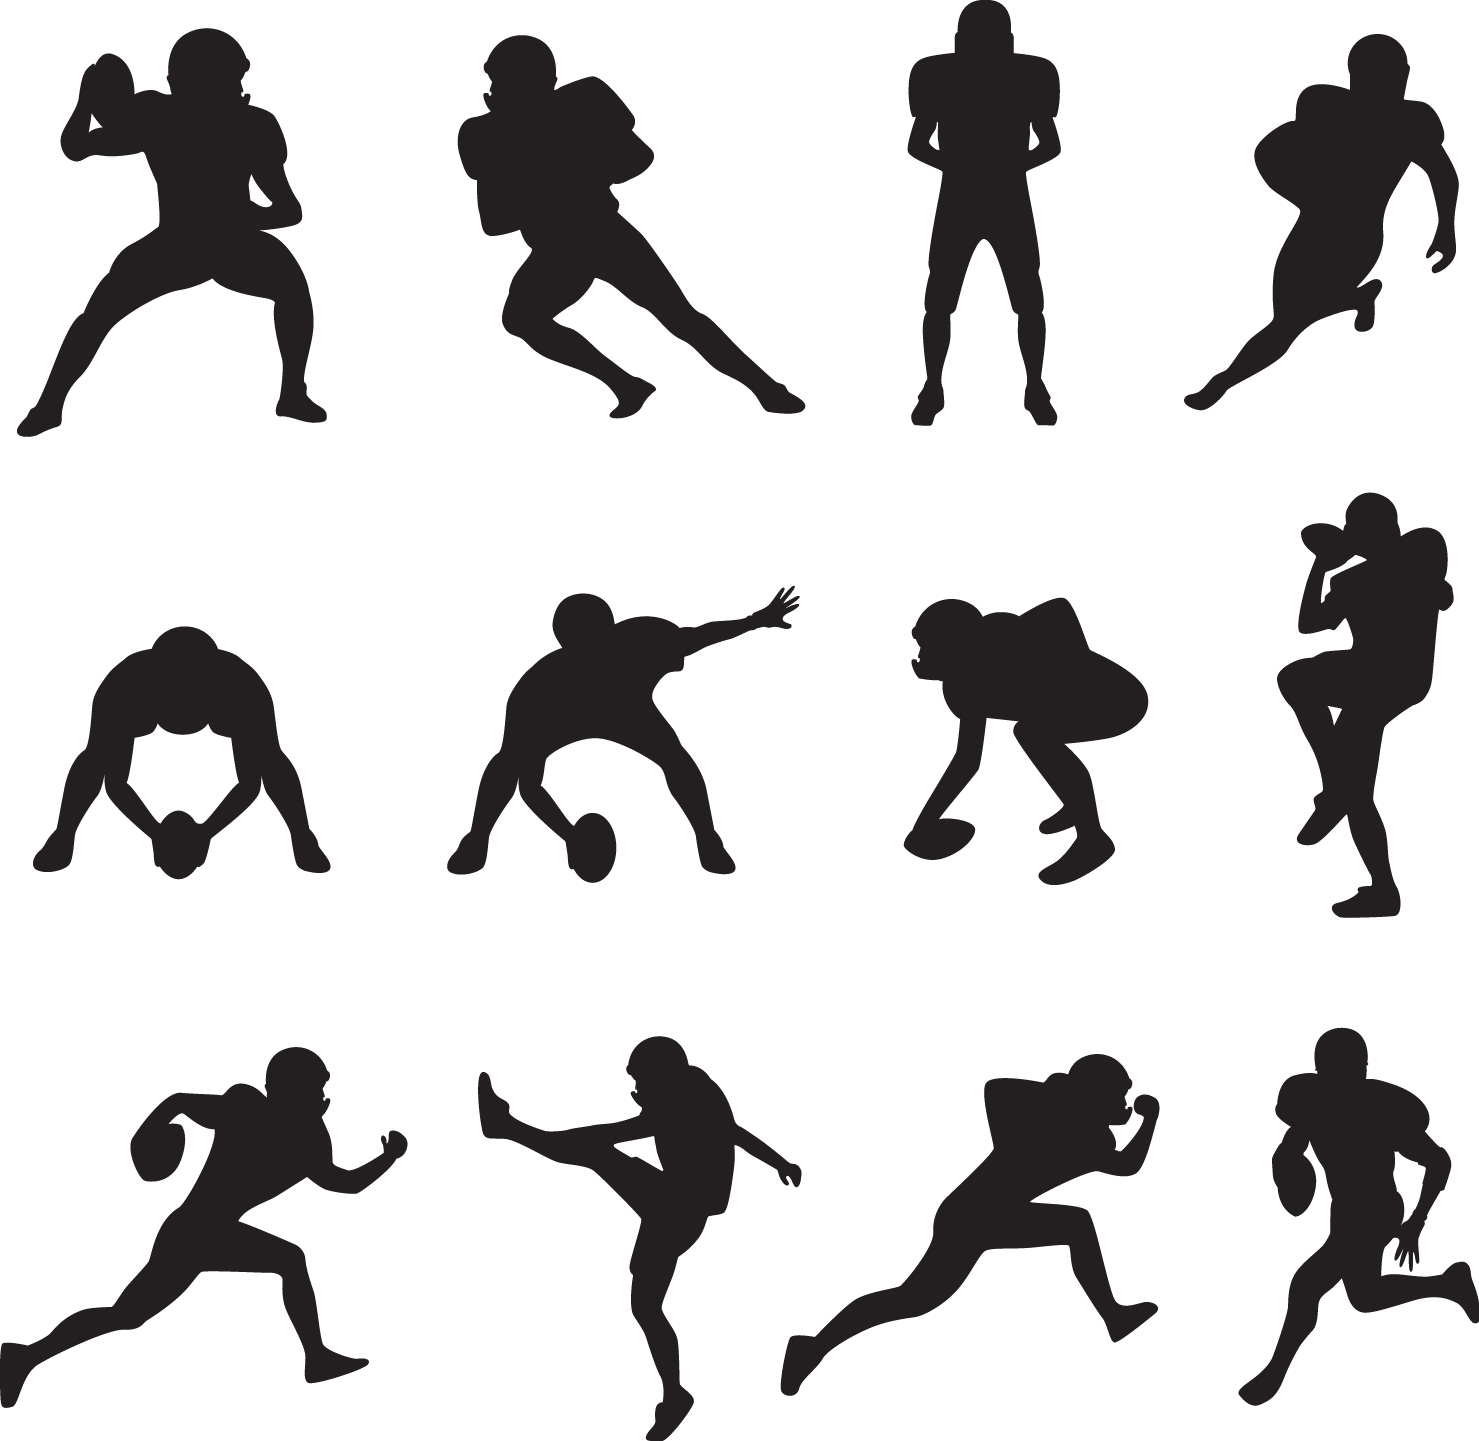 Football player silhouette